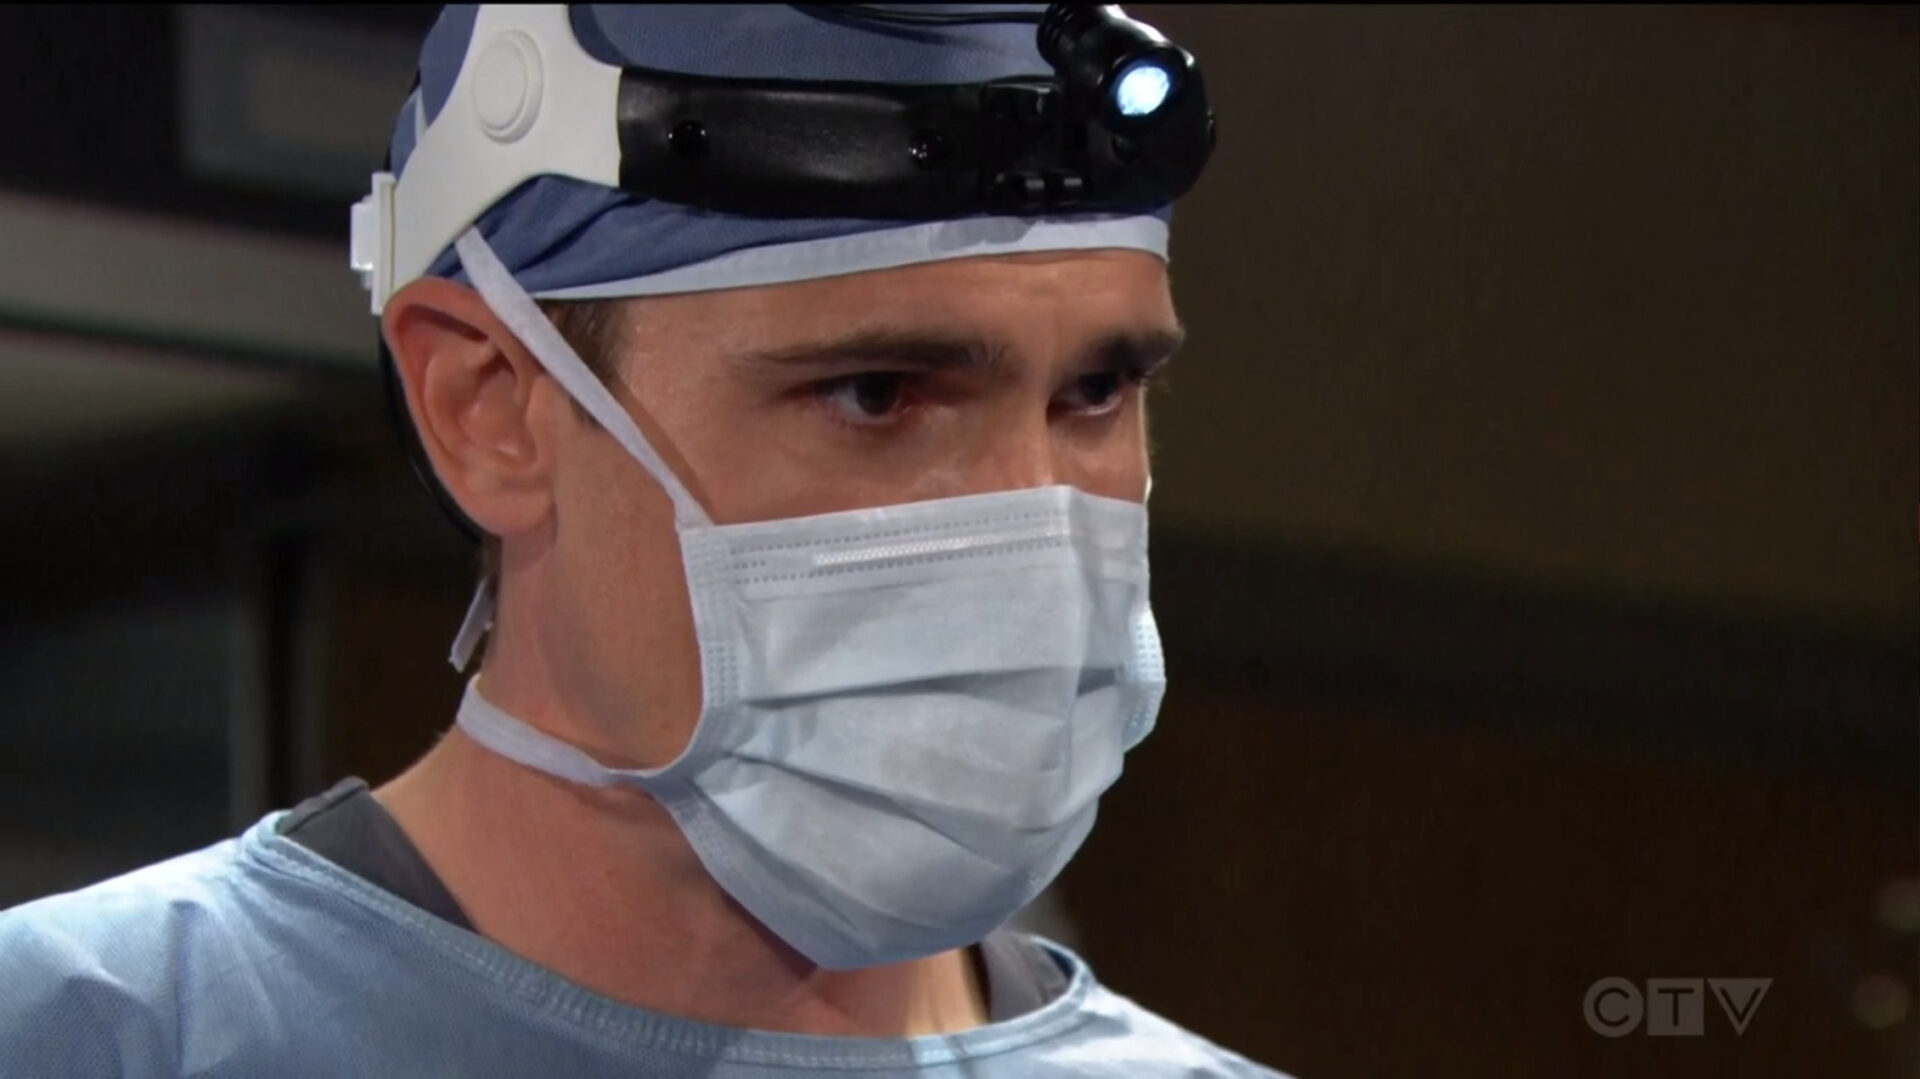 finn helps bridget save her own father's life in surgery B&B recaps